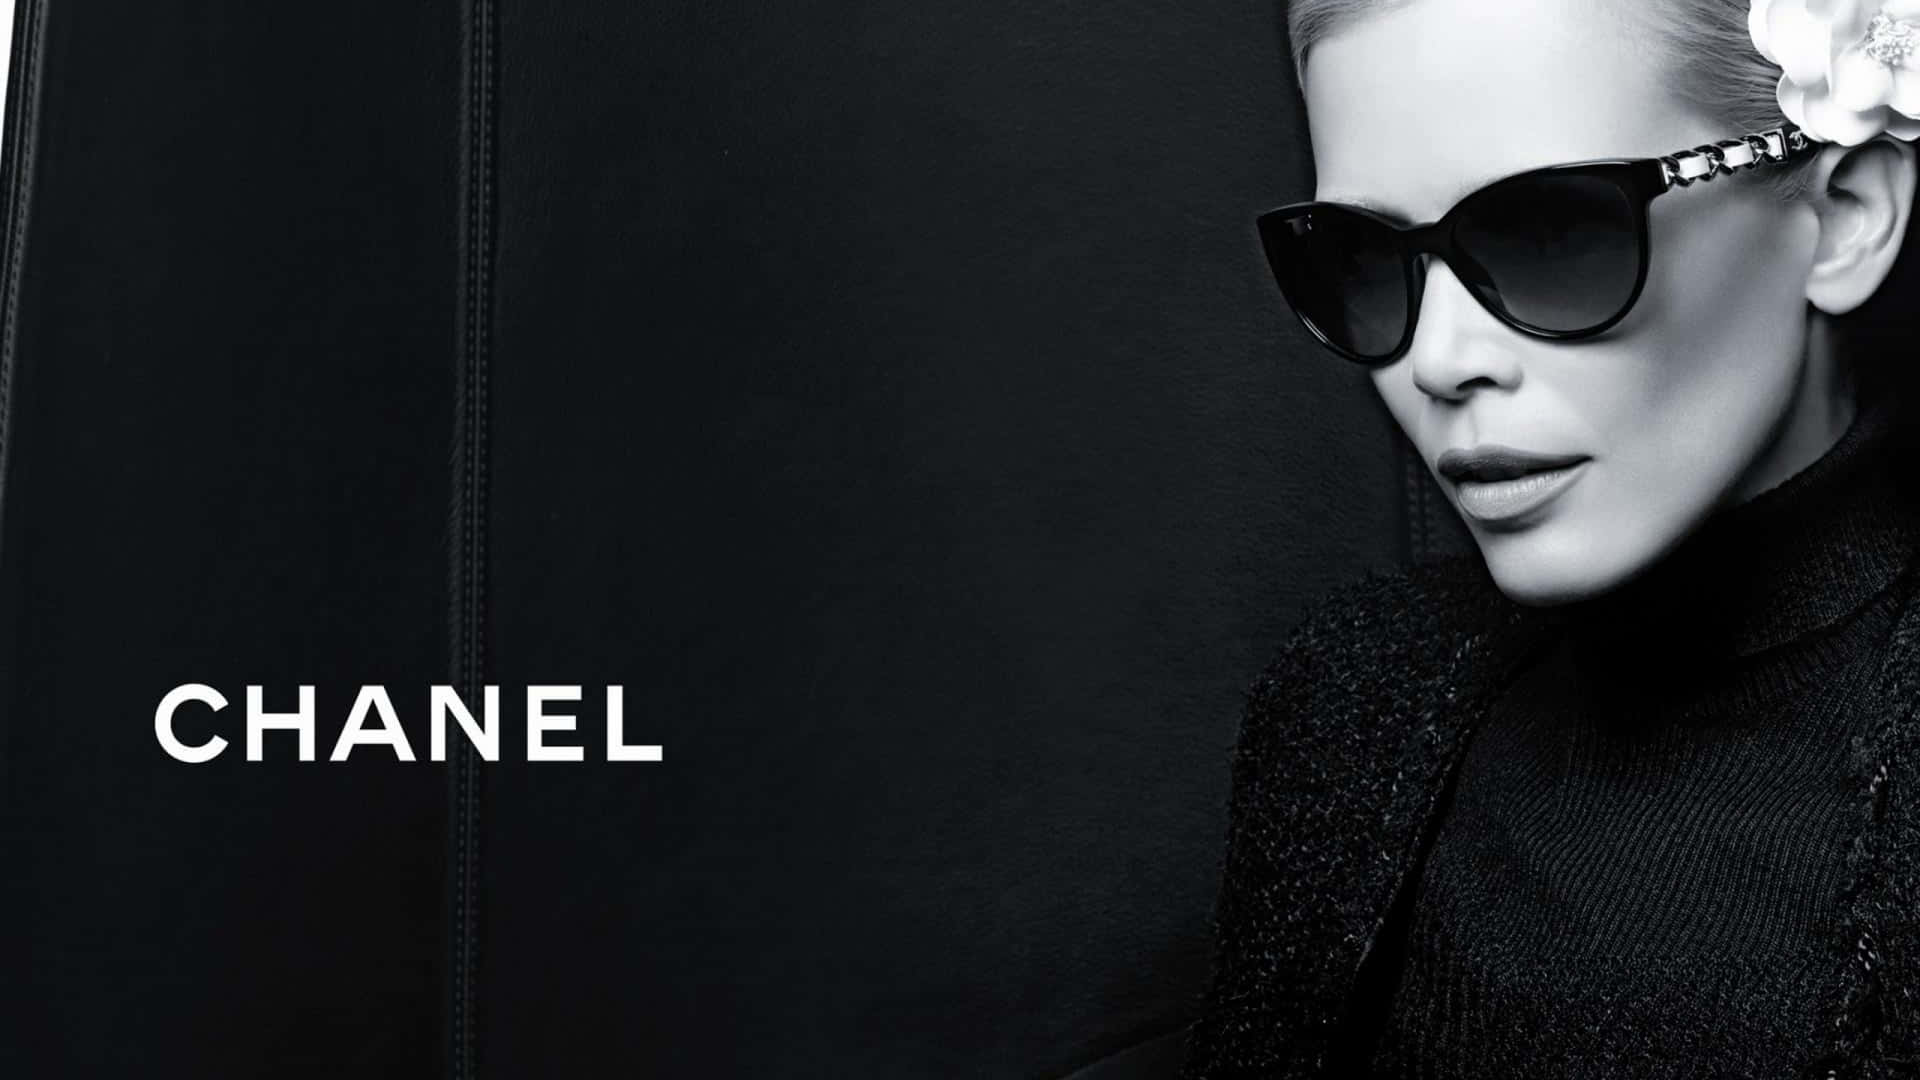 Chanel Pictures Wallpaper